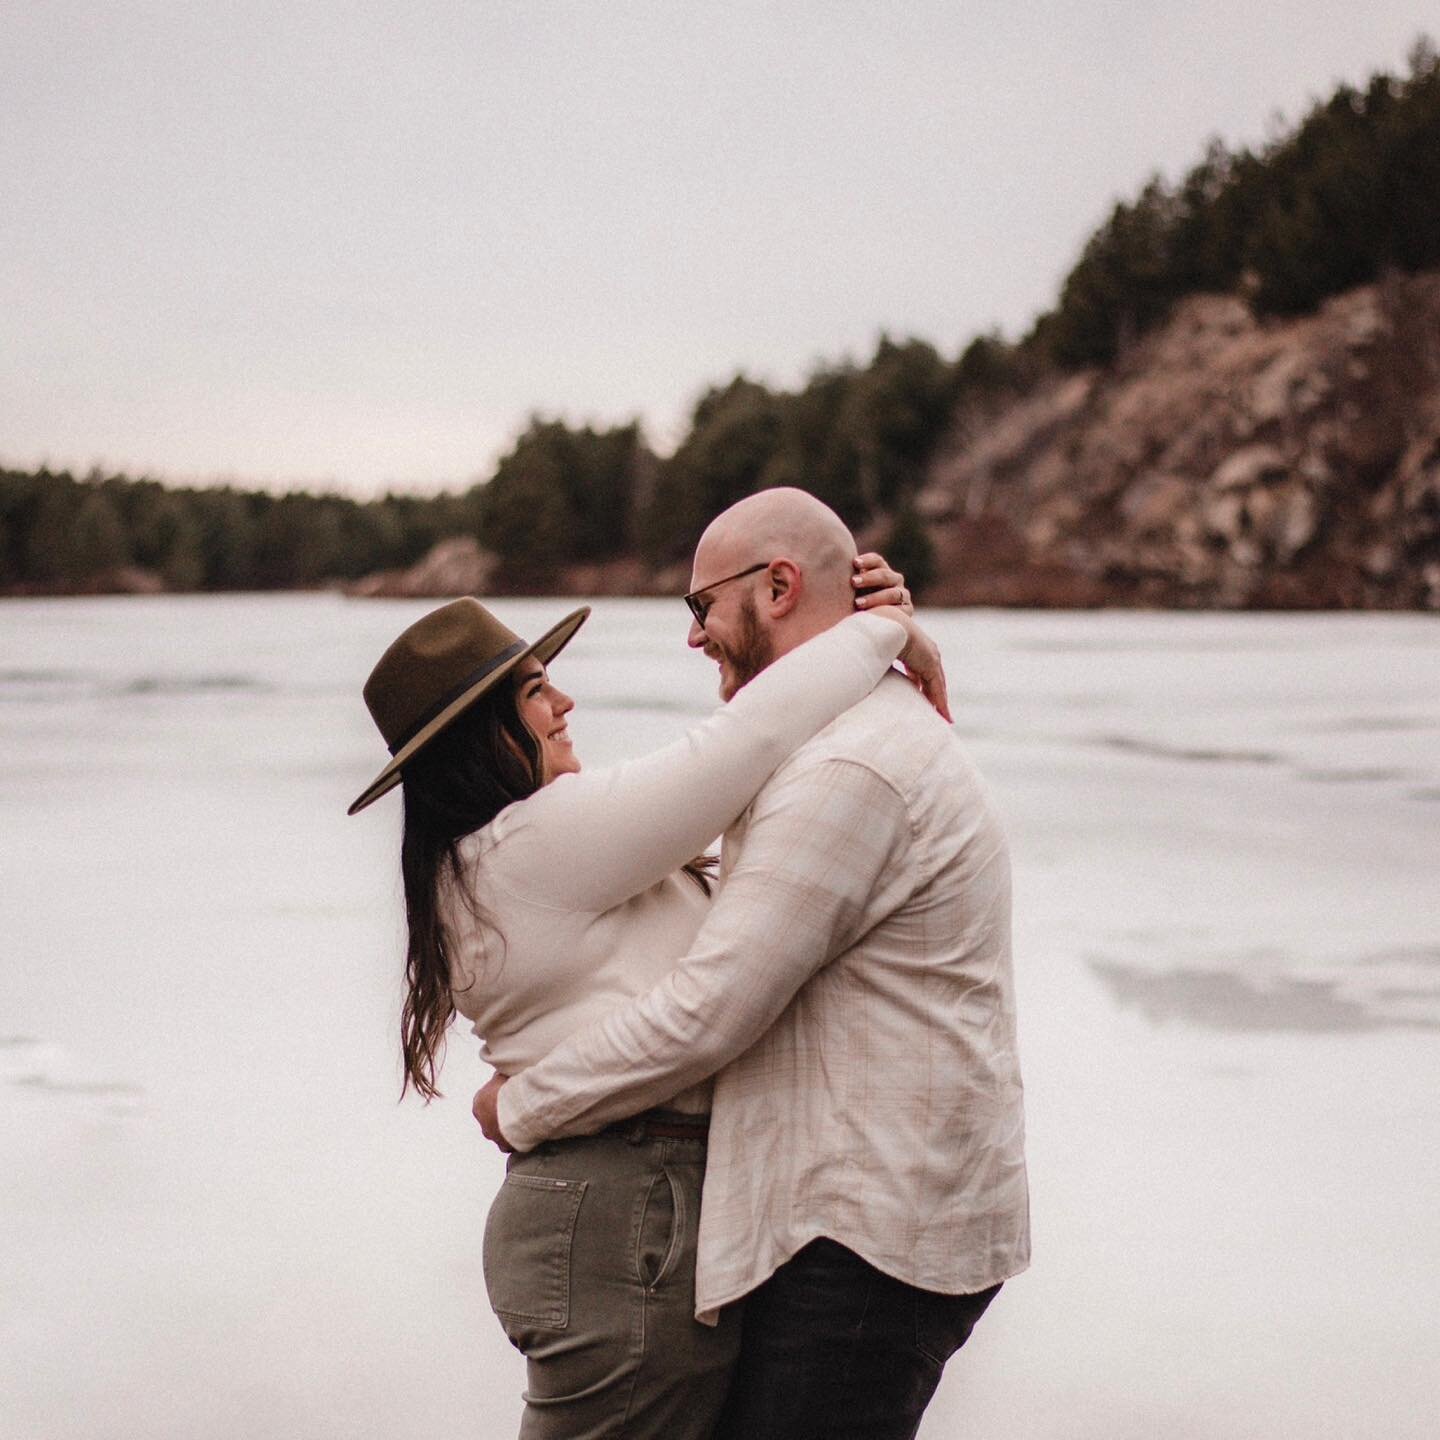 Just some classic Sudbury landscapes for this engagement session!